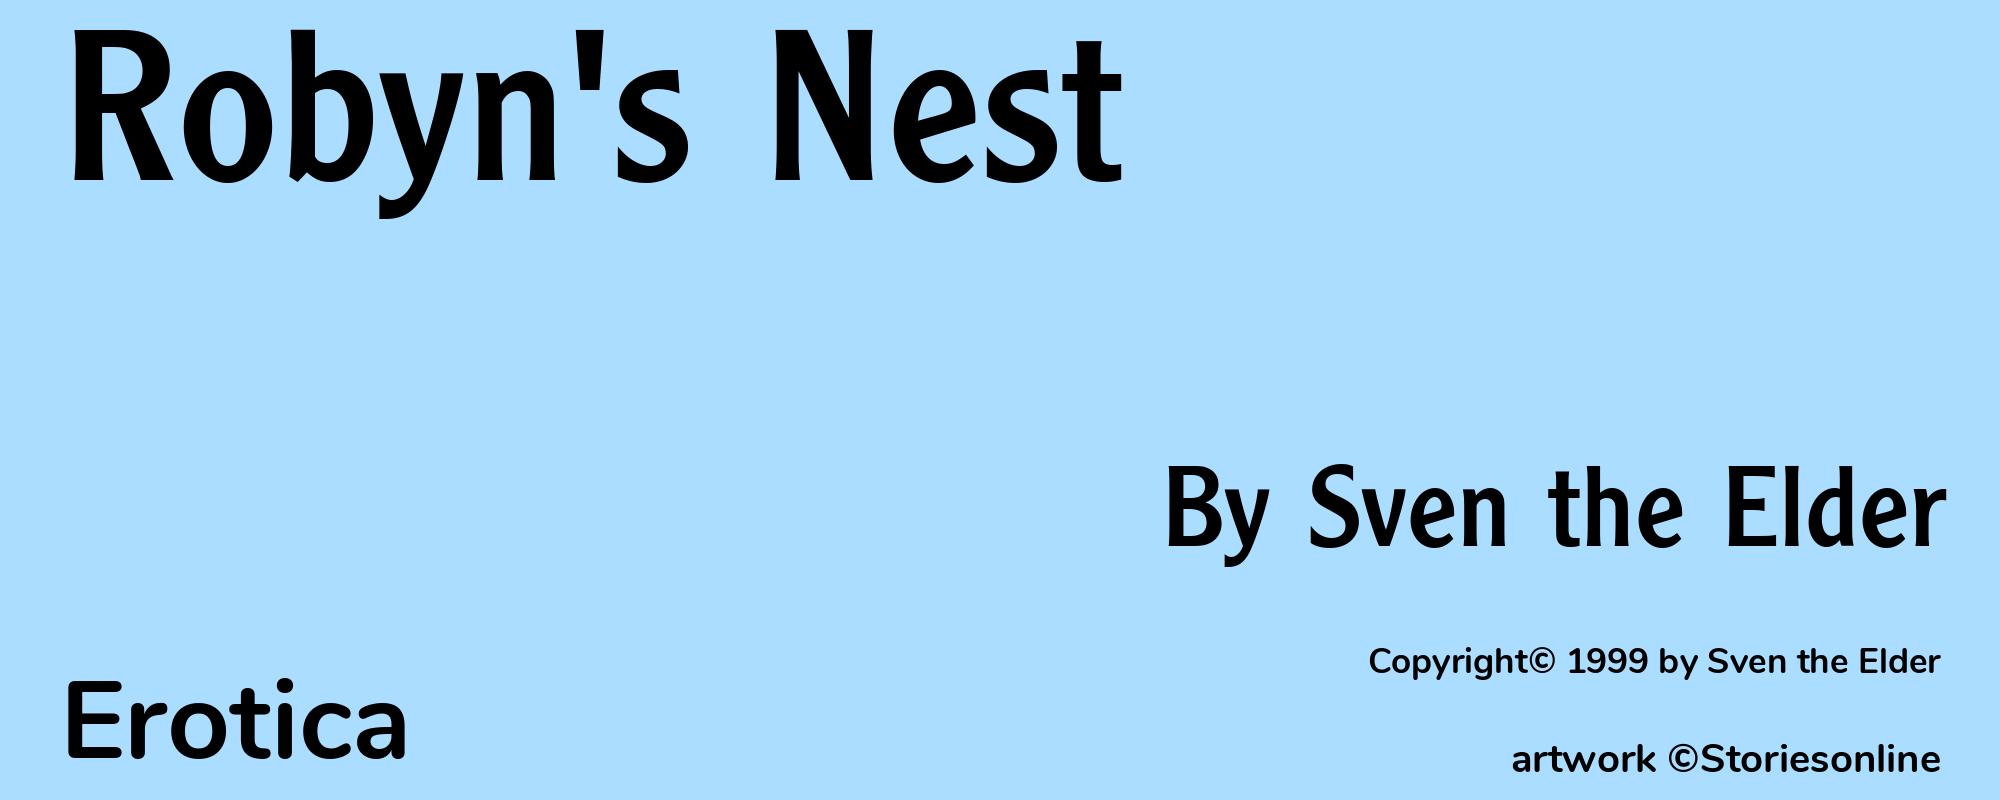 Robyn's Nest - Cover